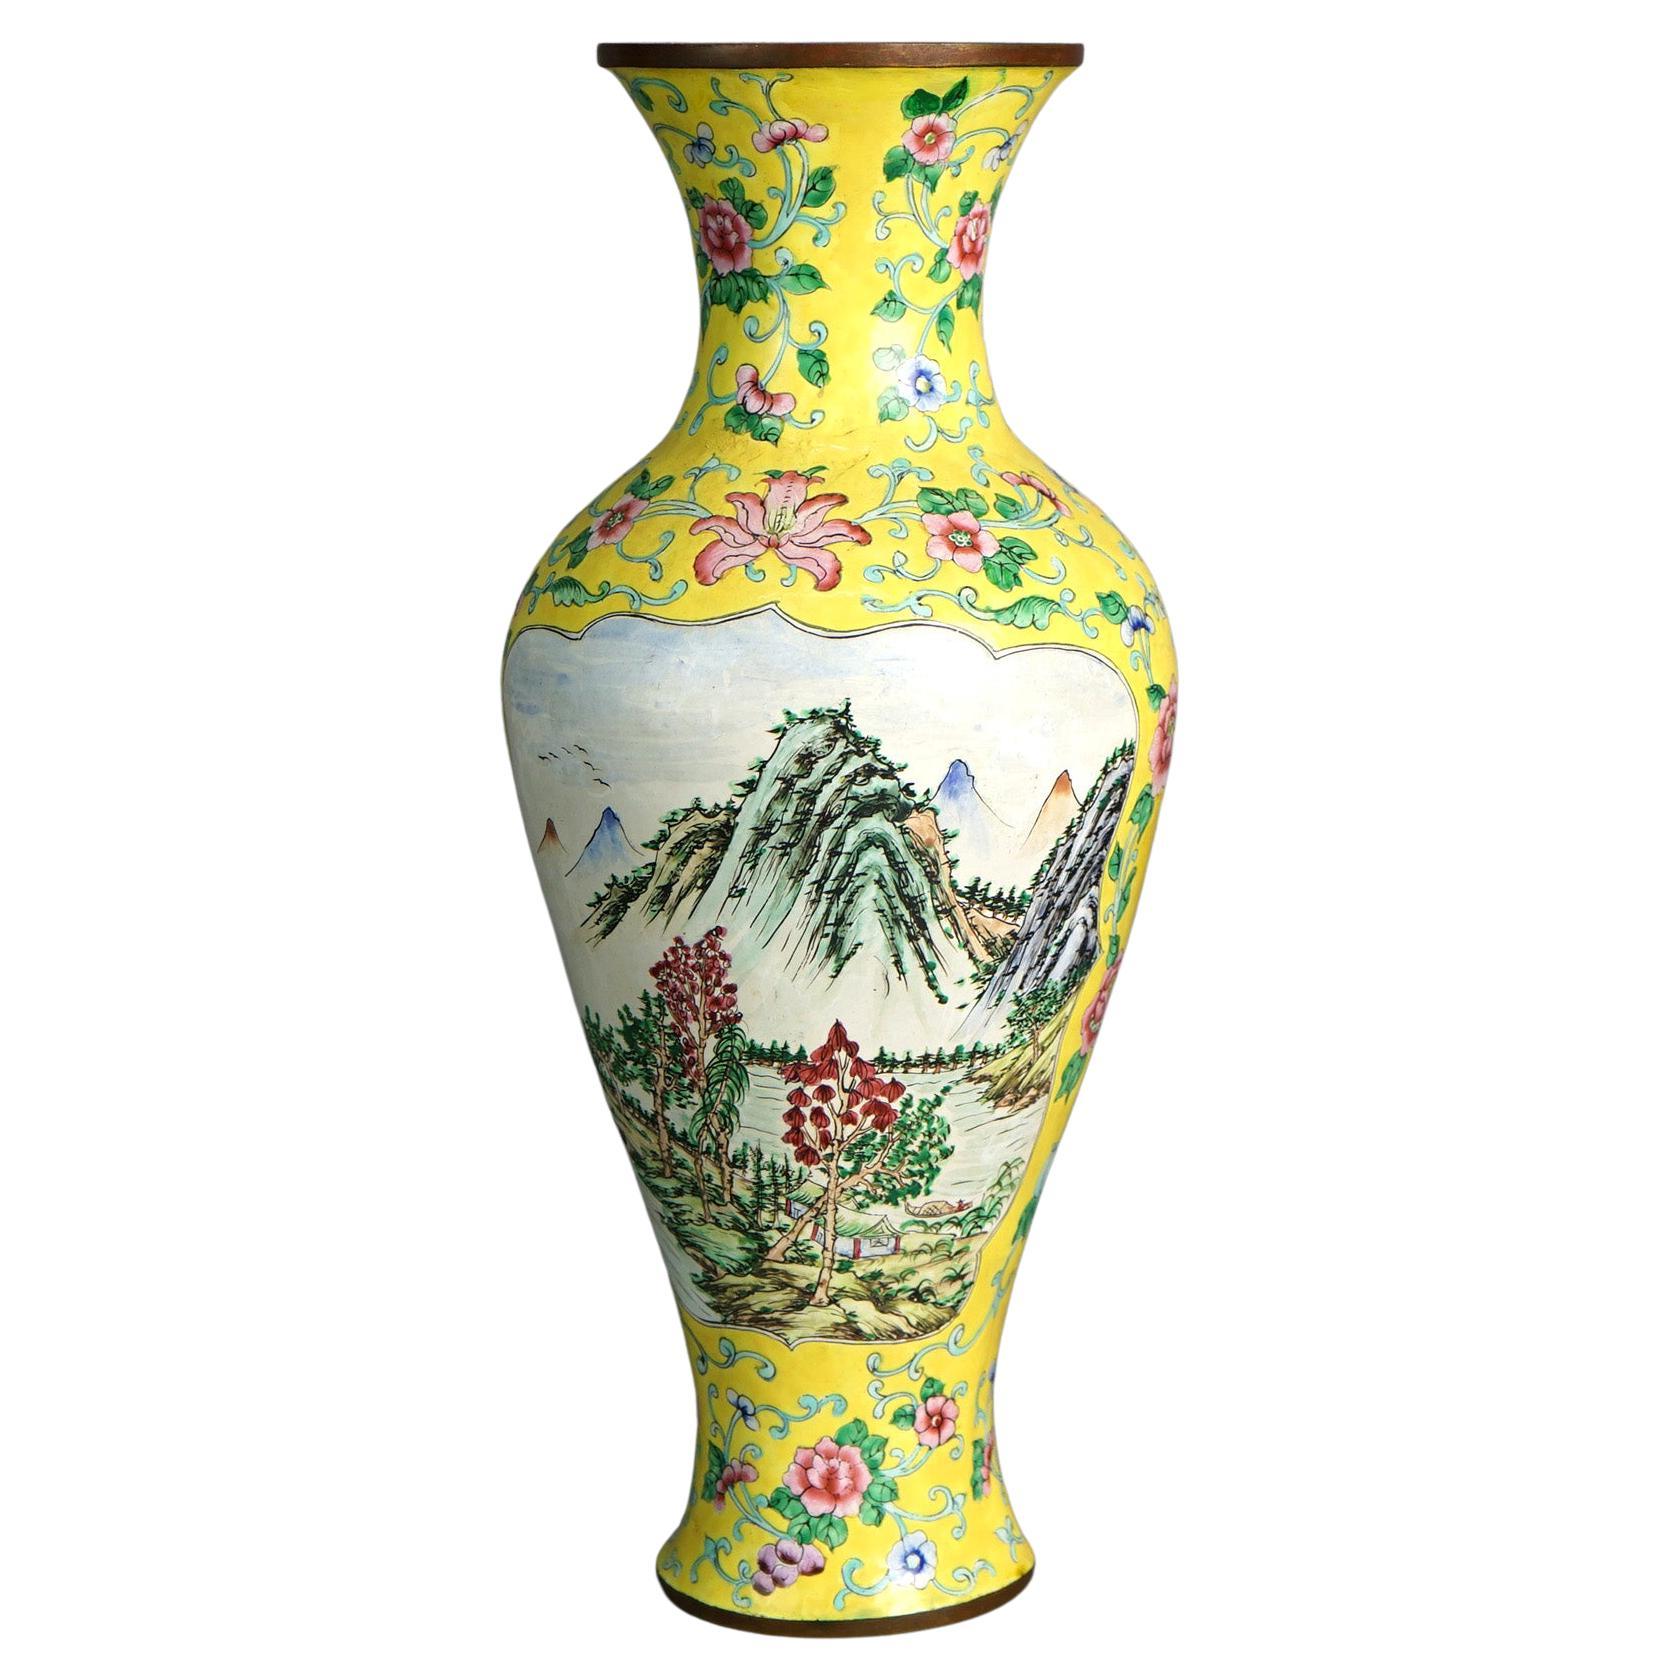 Antique Chinese Enameled Vase with Landscape & Flowers C1930 For Sale